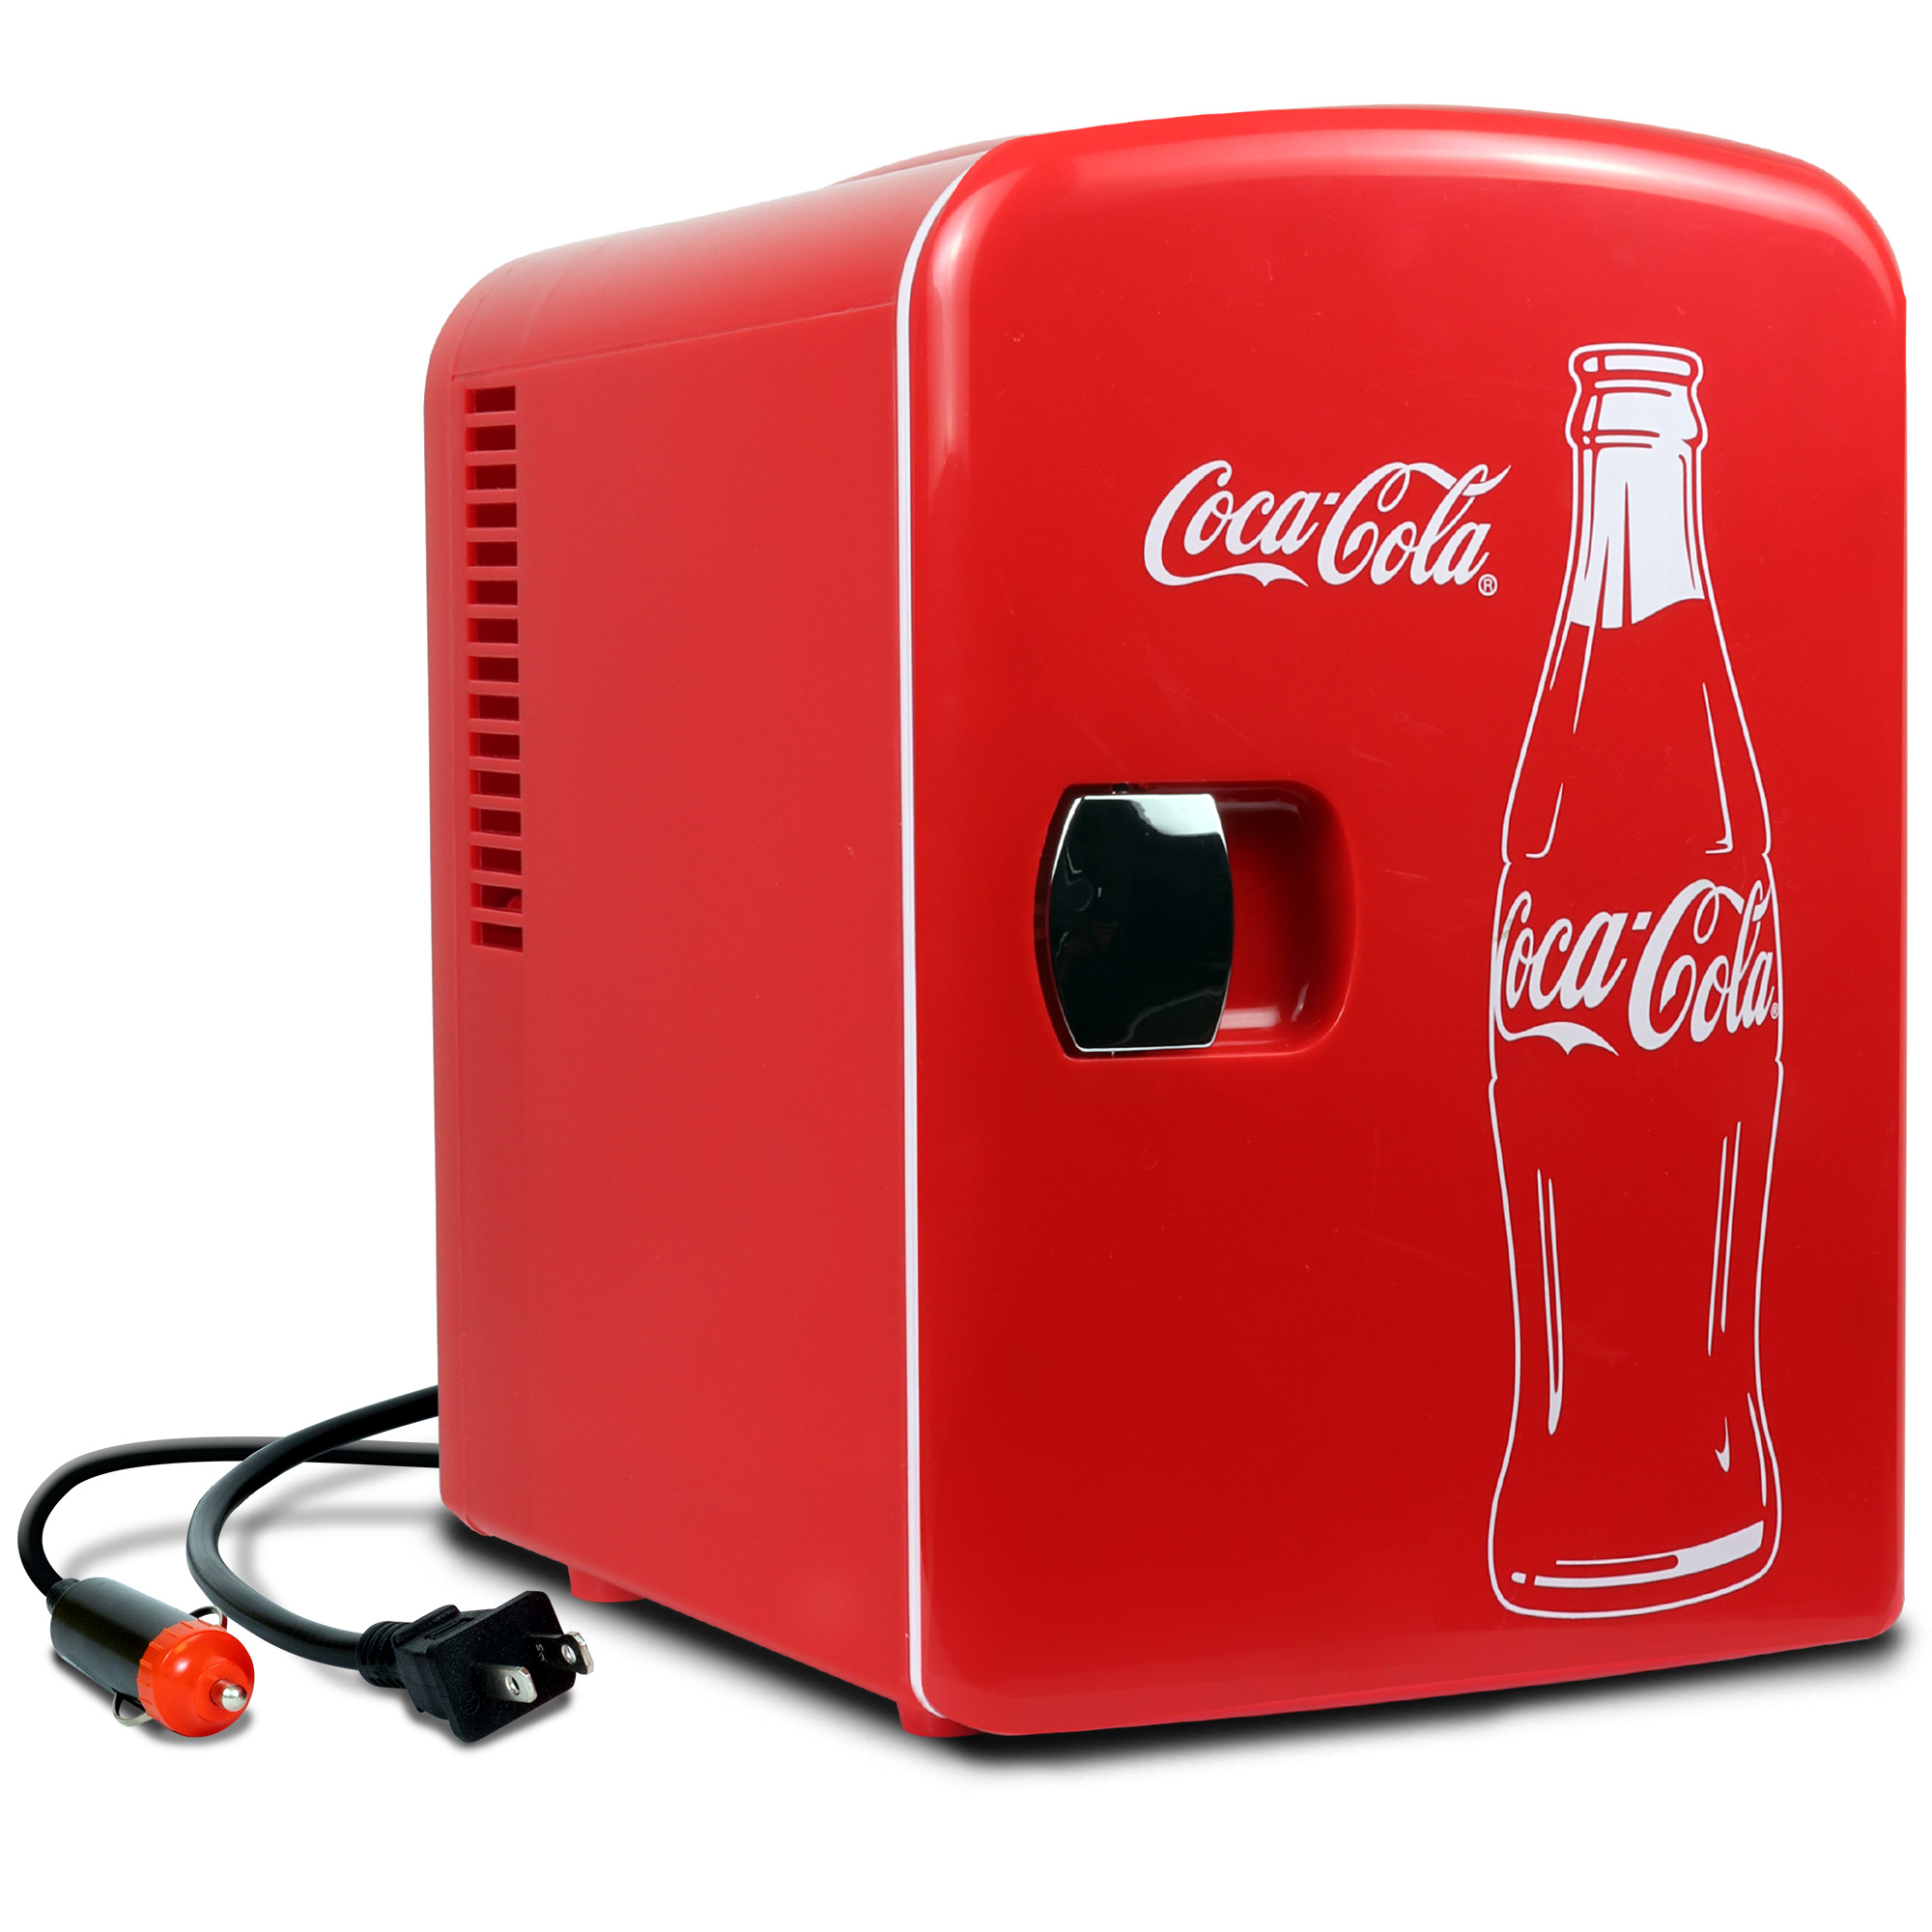 Coca-Cola Classic 4L Mini Fridge w/ 12V DC and 110V AC Cords, 6 Can Portable Cooler, Personal Travel Refrigerator for Snacks Lunch Drinks Cosmetics, Desk Home Office Dorm, Red - image 2 of 8